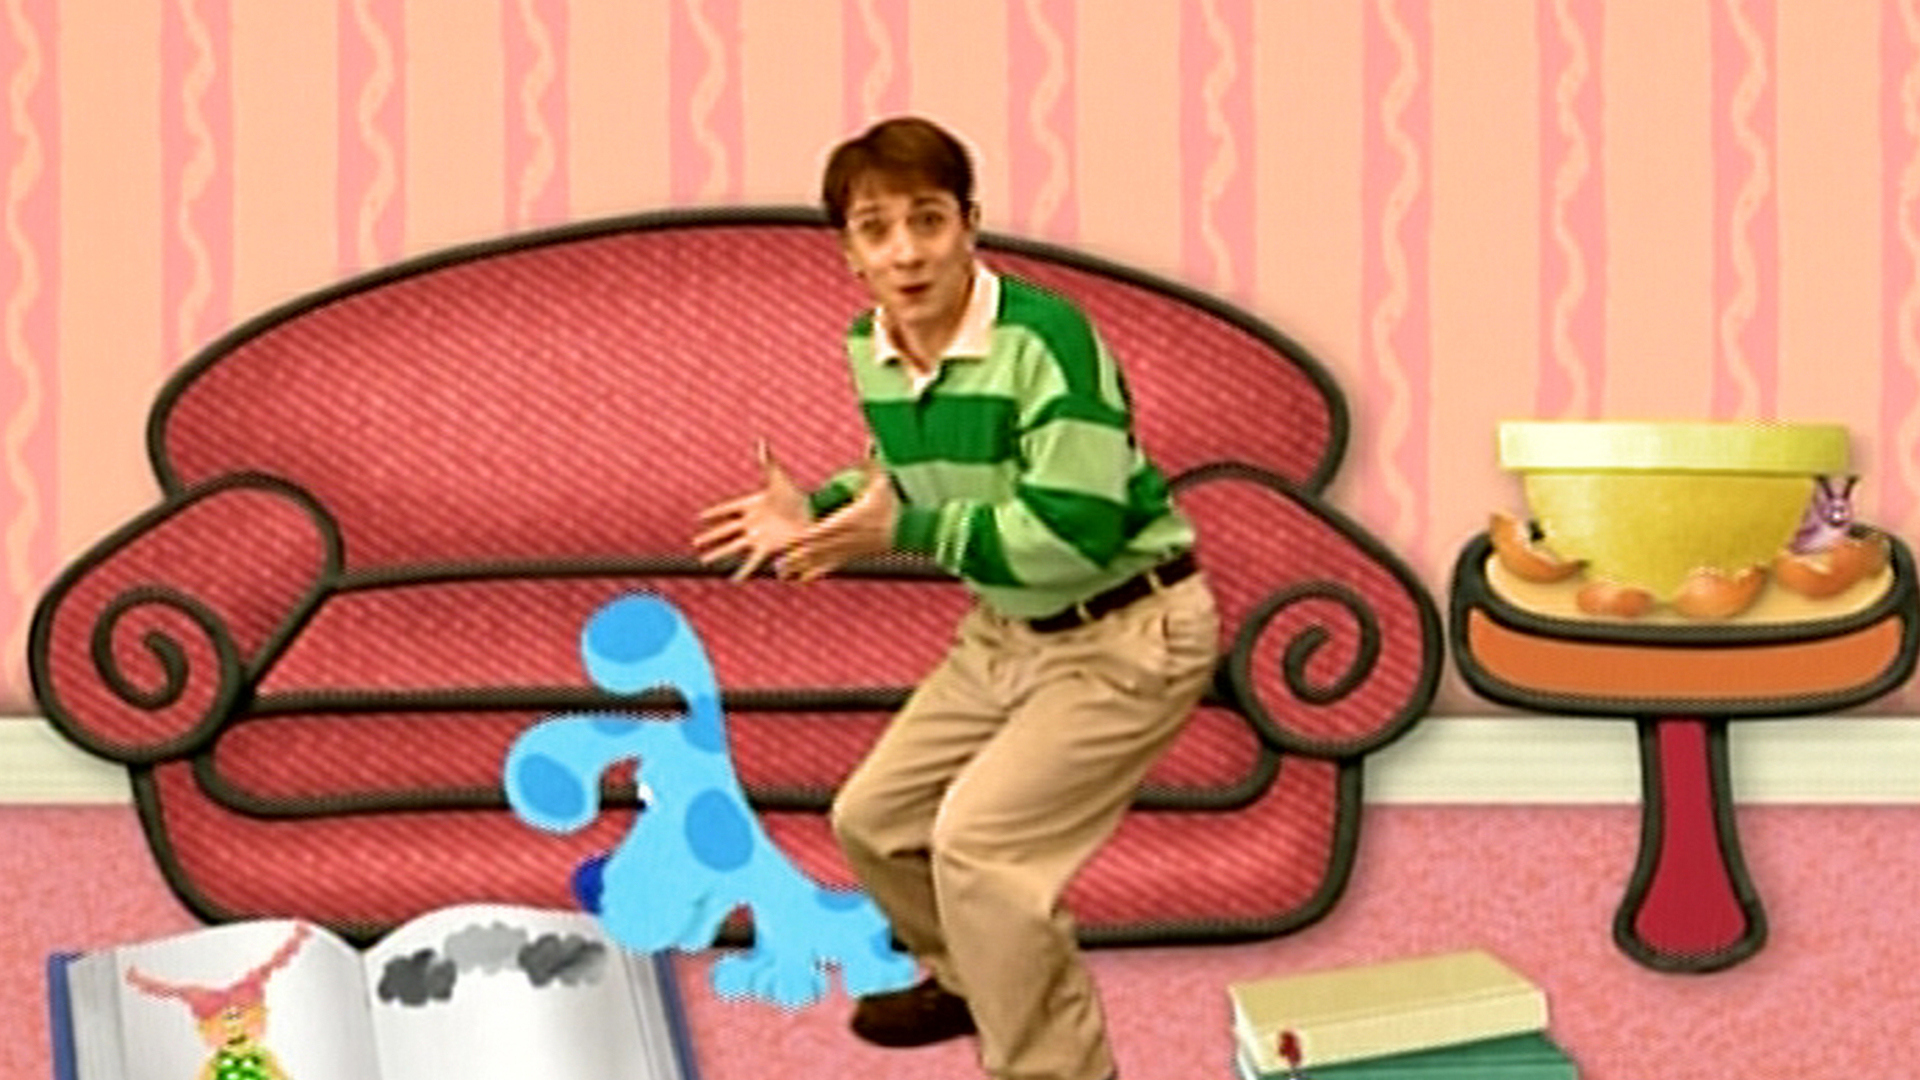 Steve from 'Blue's Clues' is back, and he's lost his hair - wide 5